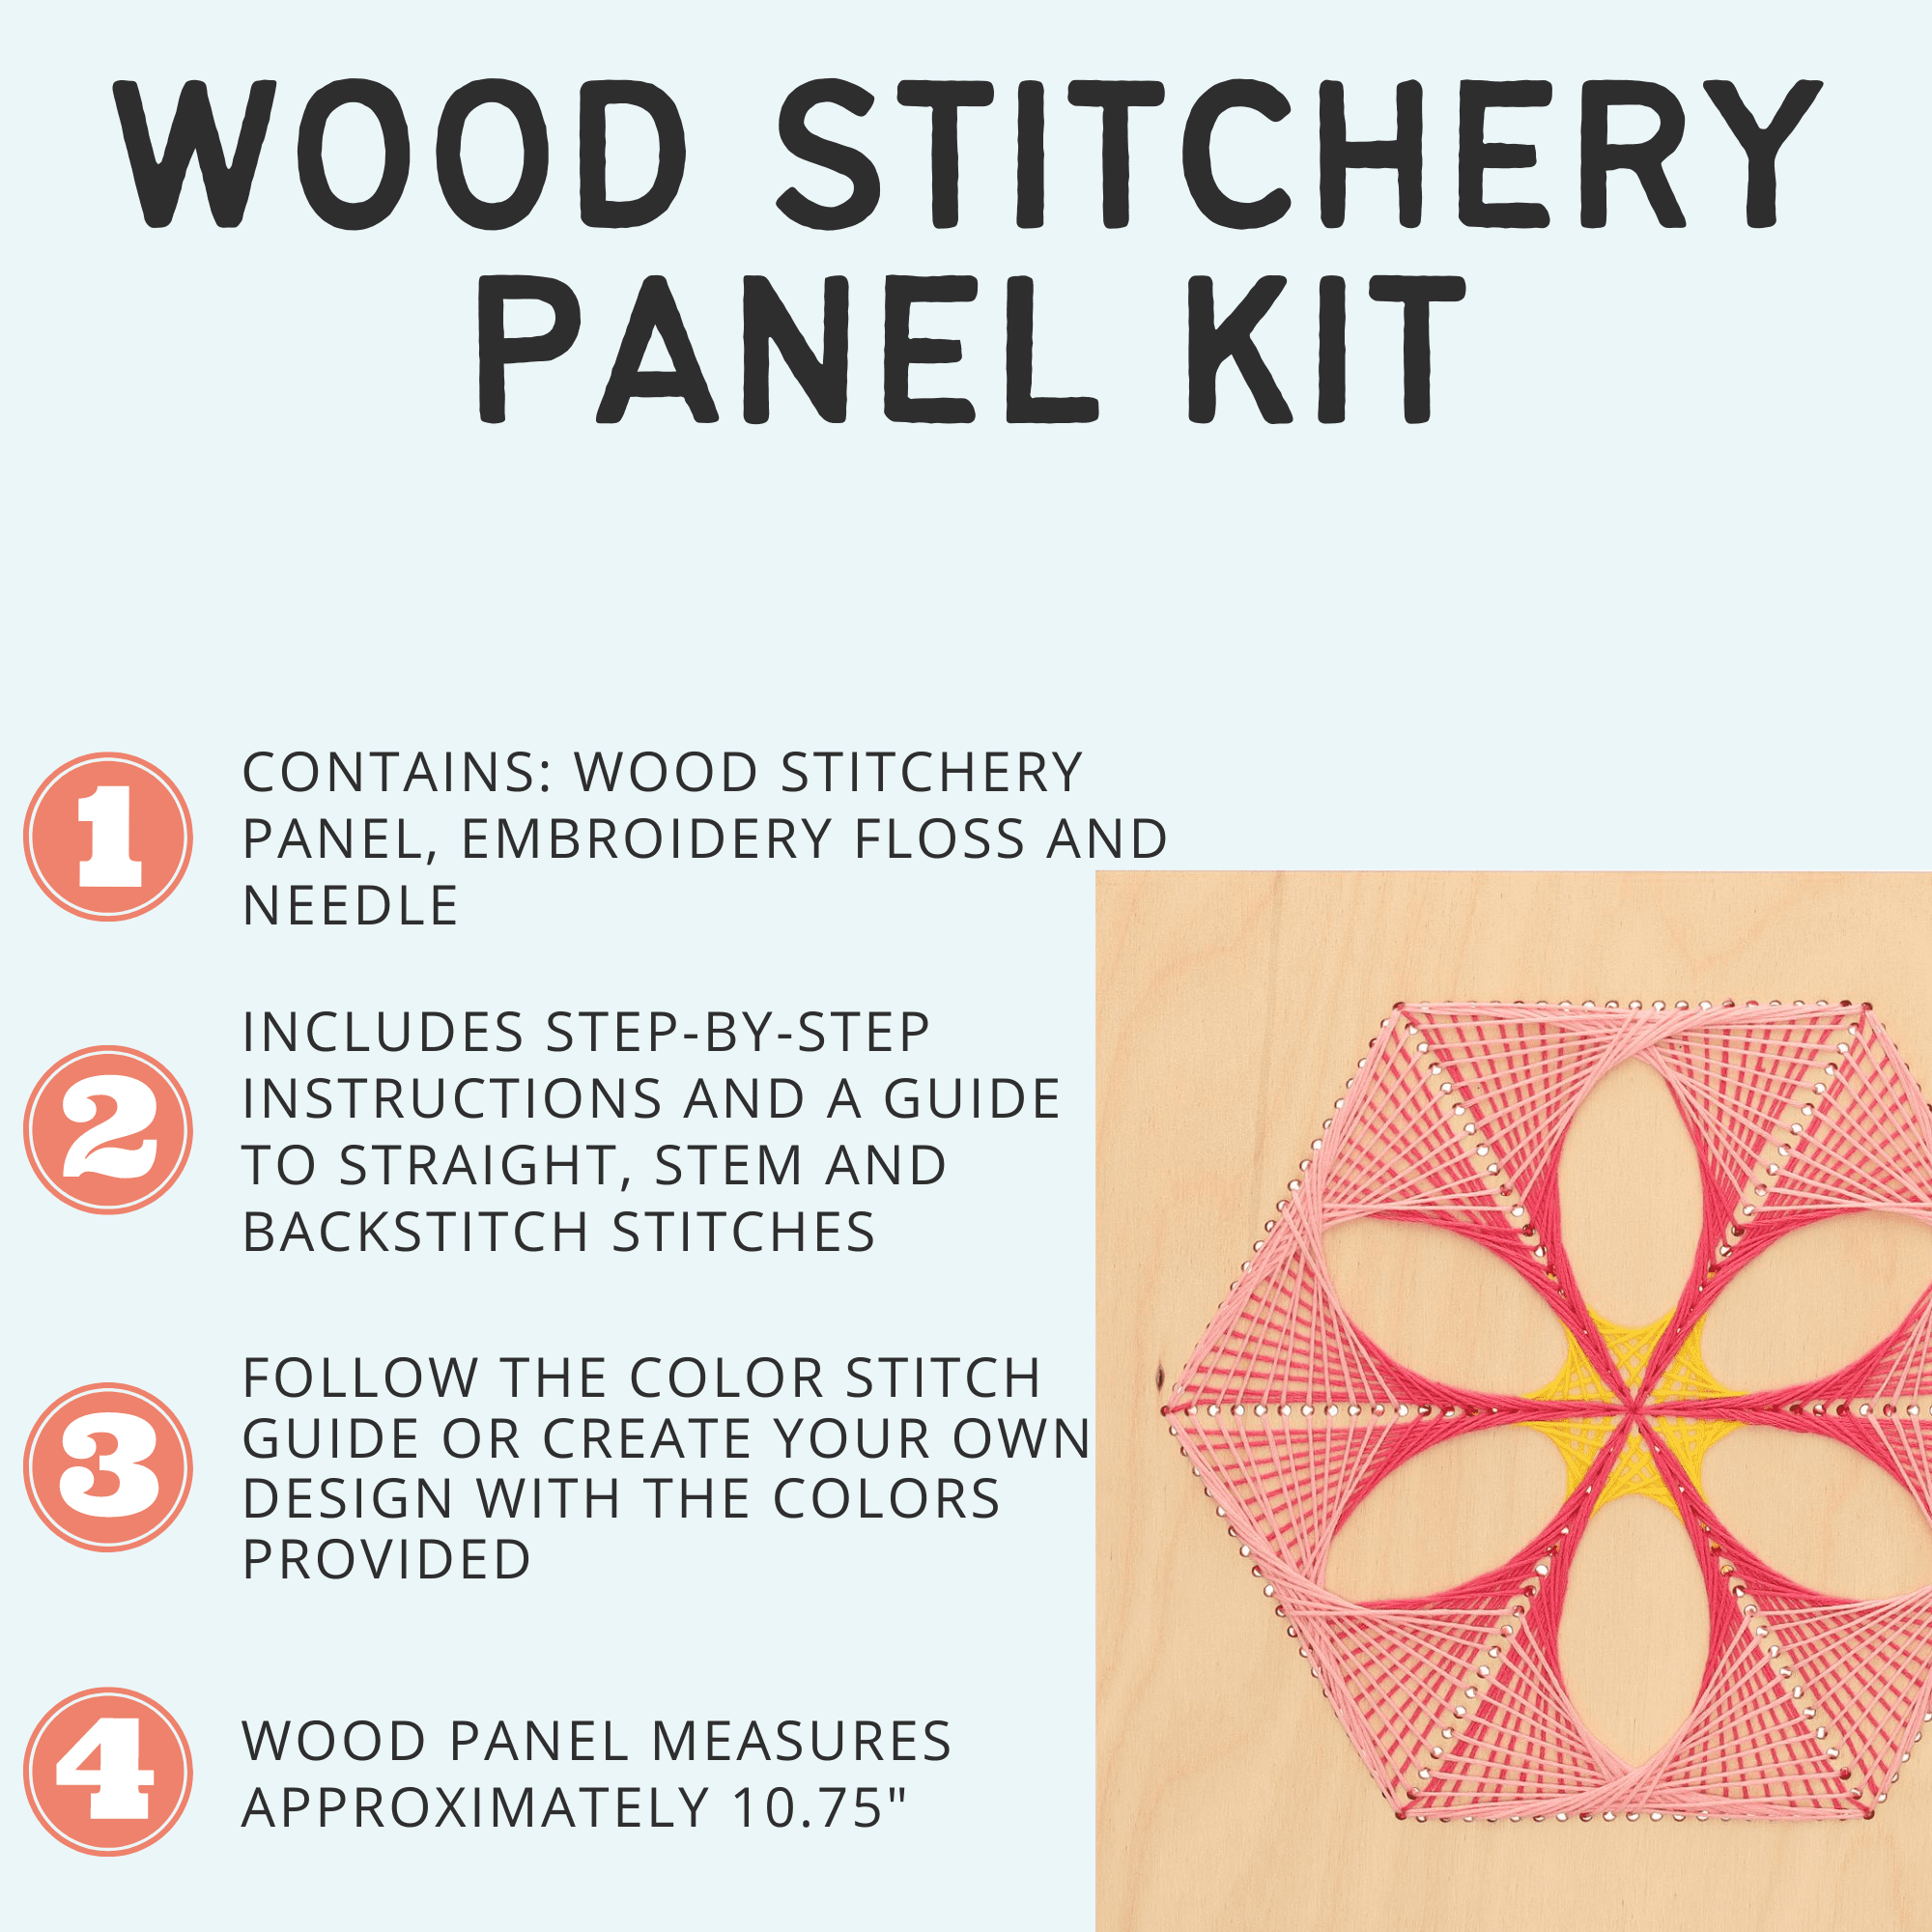 Wood Stitched String Art Kit with Shadow Box Hexagon Flower